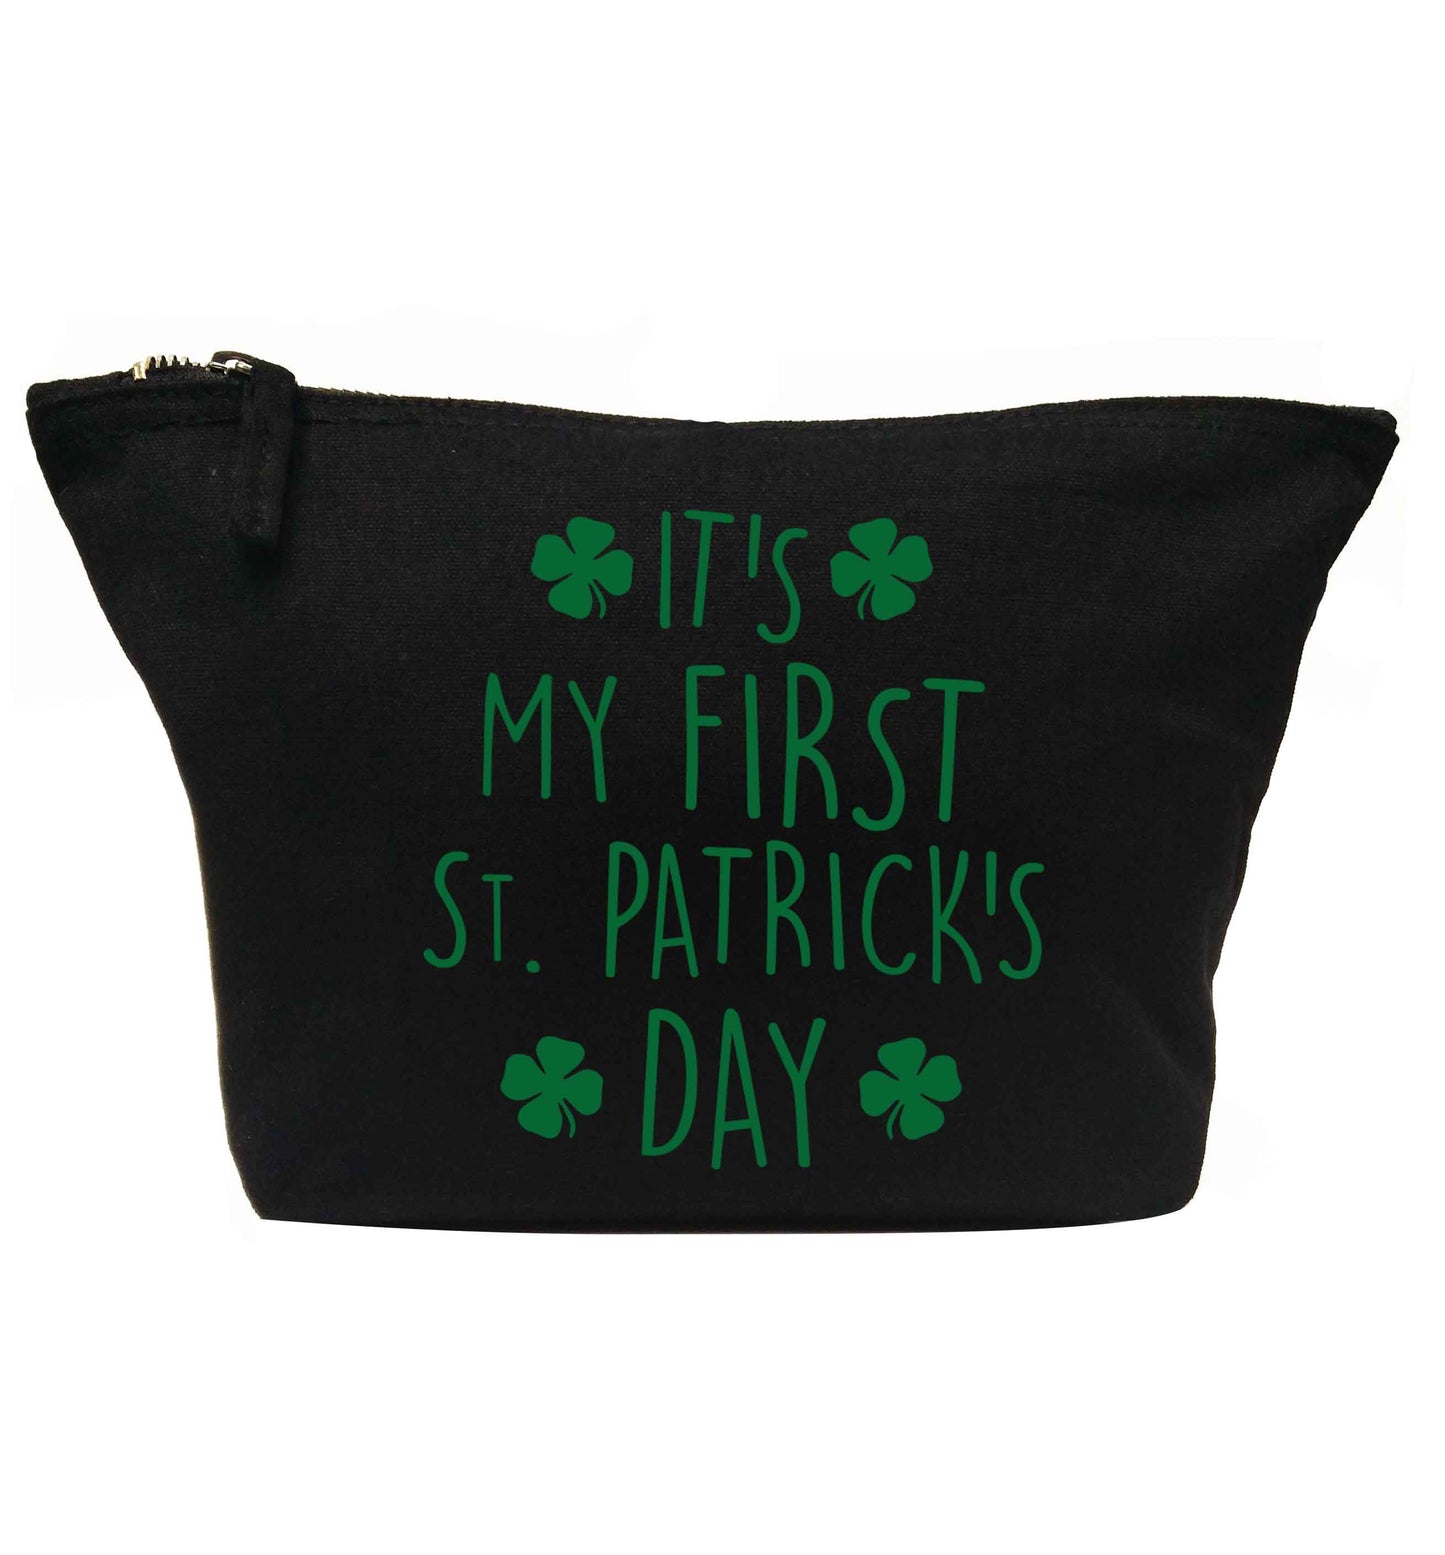 It's my first St.Patrick's day | Makeup / wash bag